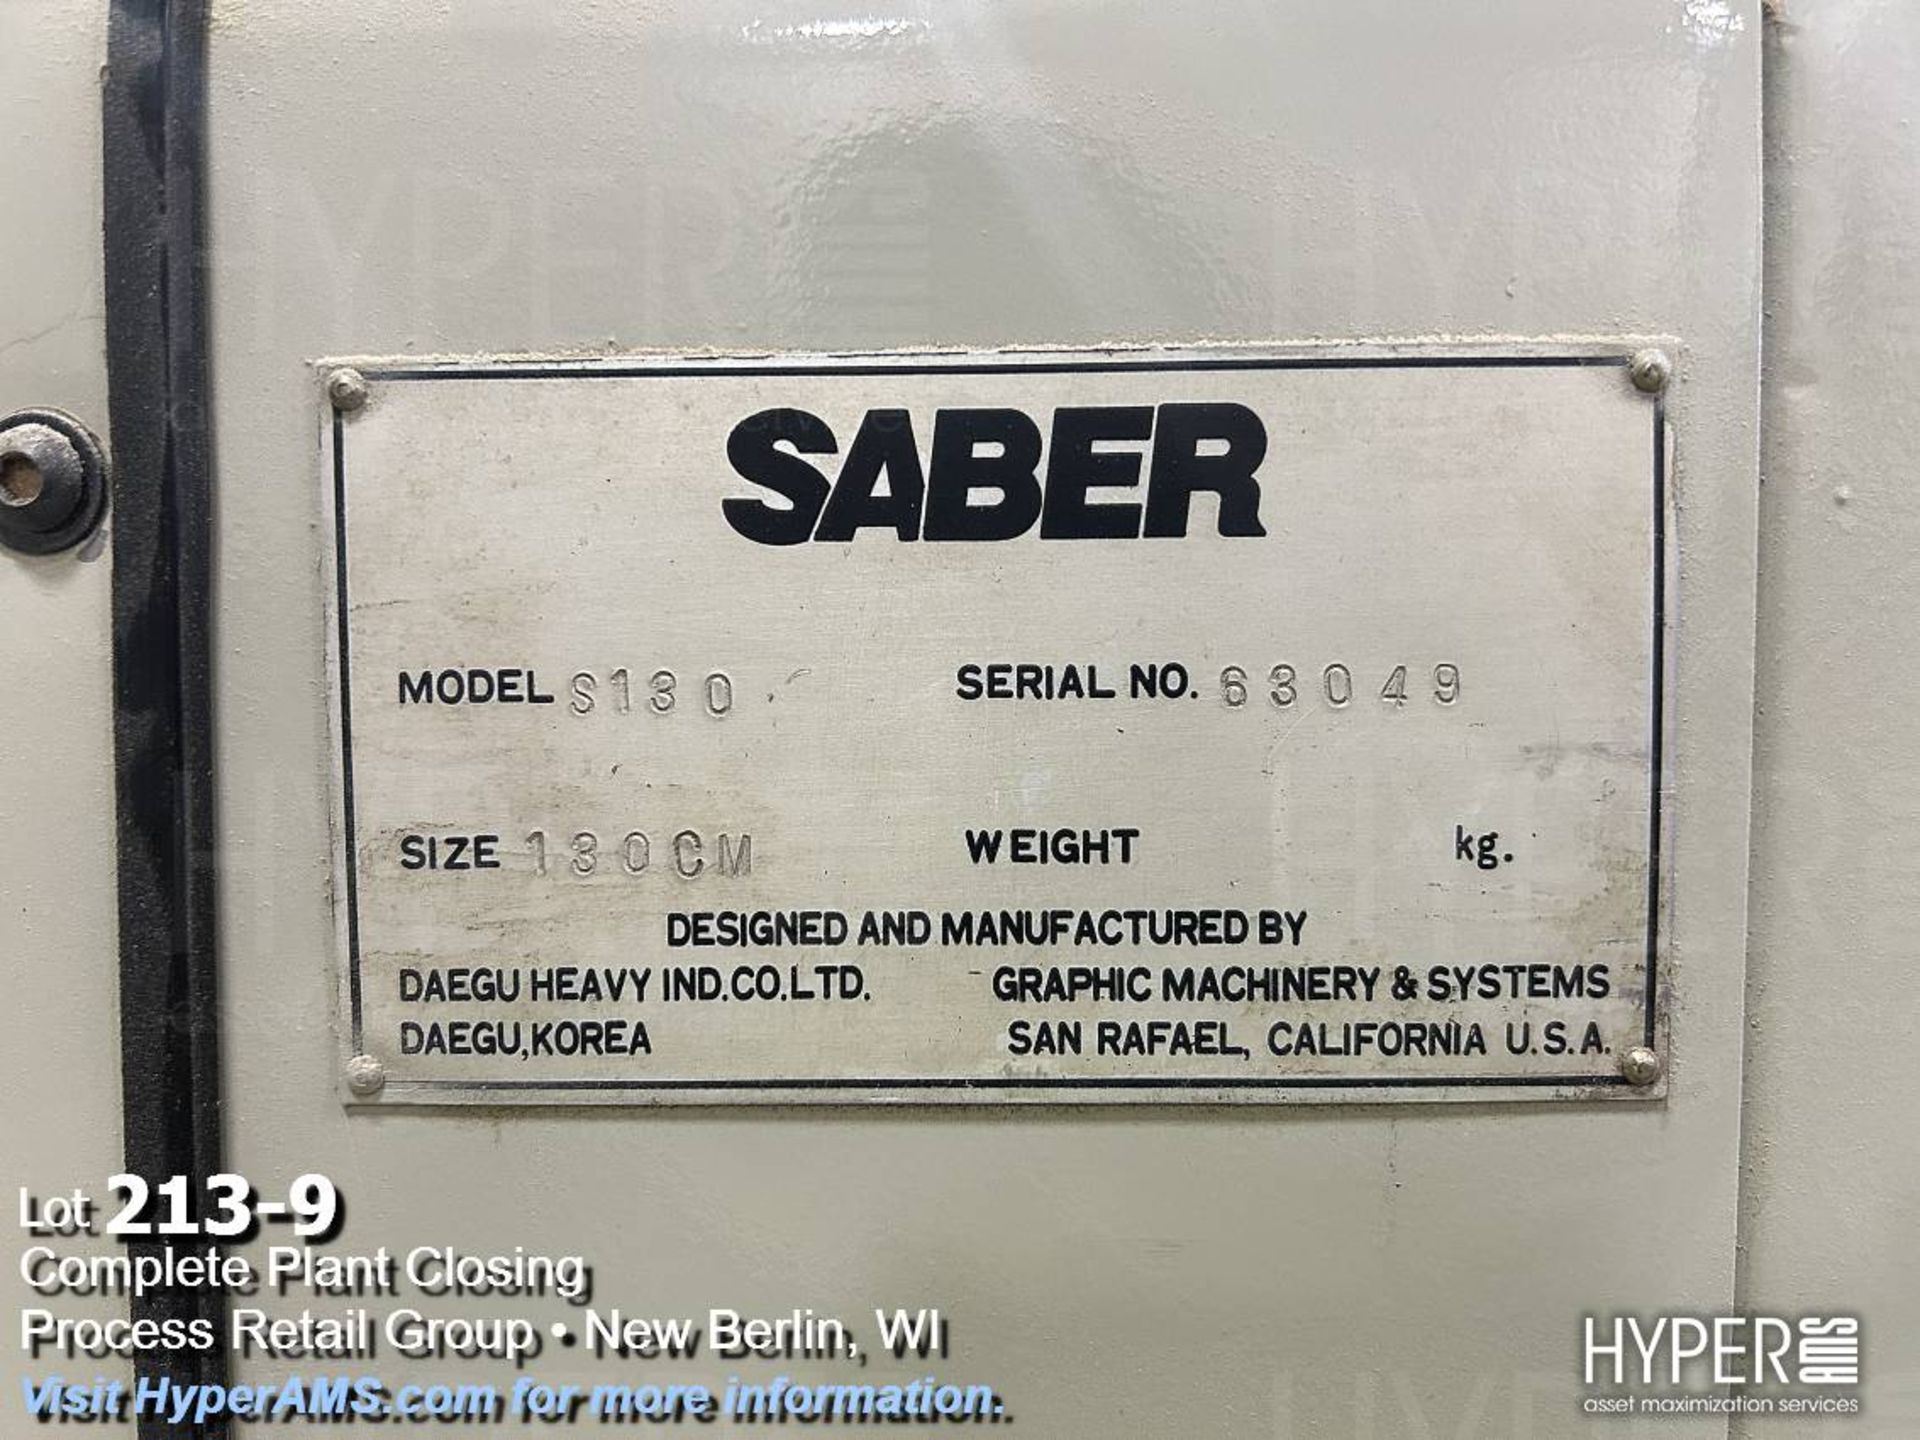 Saber S130 Guillotine Paper Cutter - Image 9 of 9